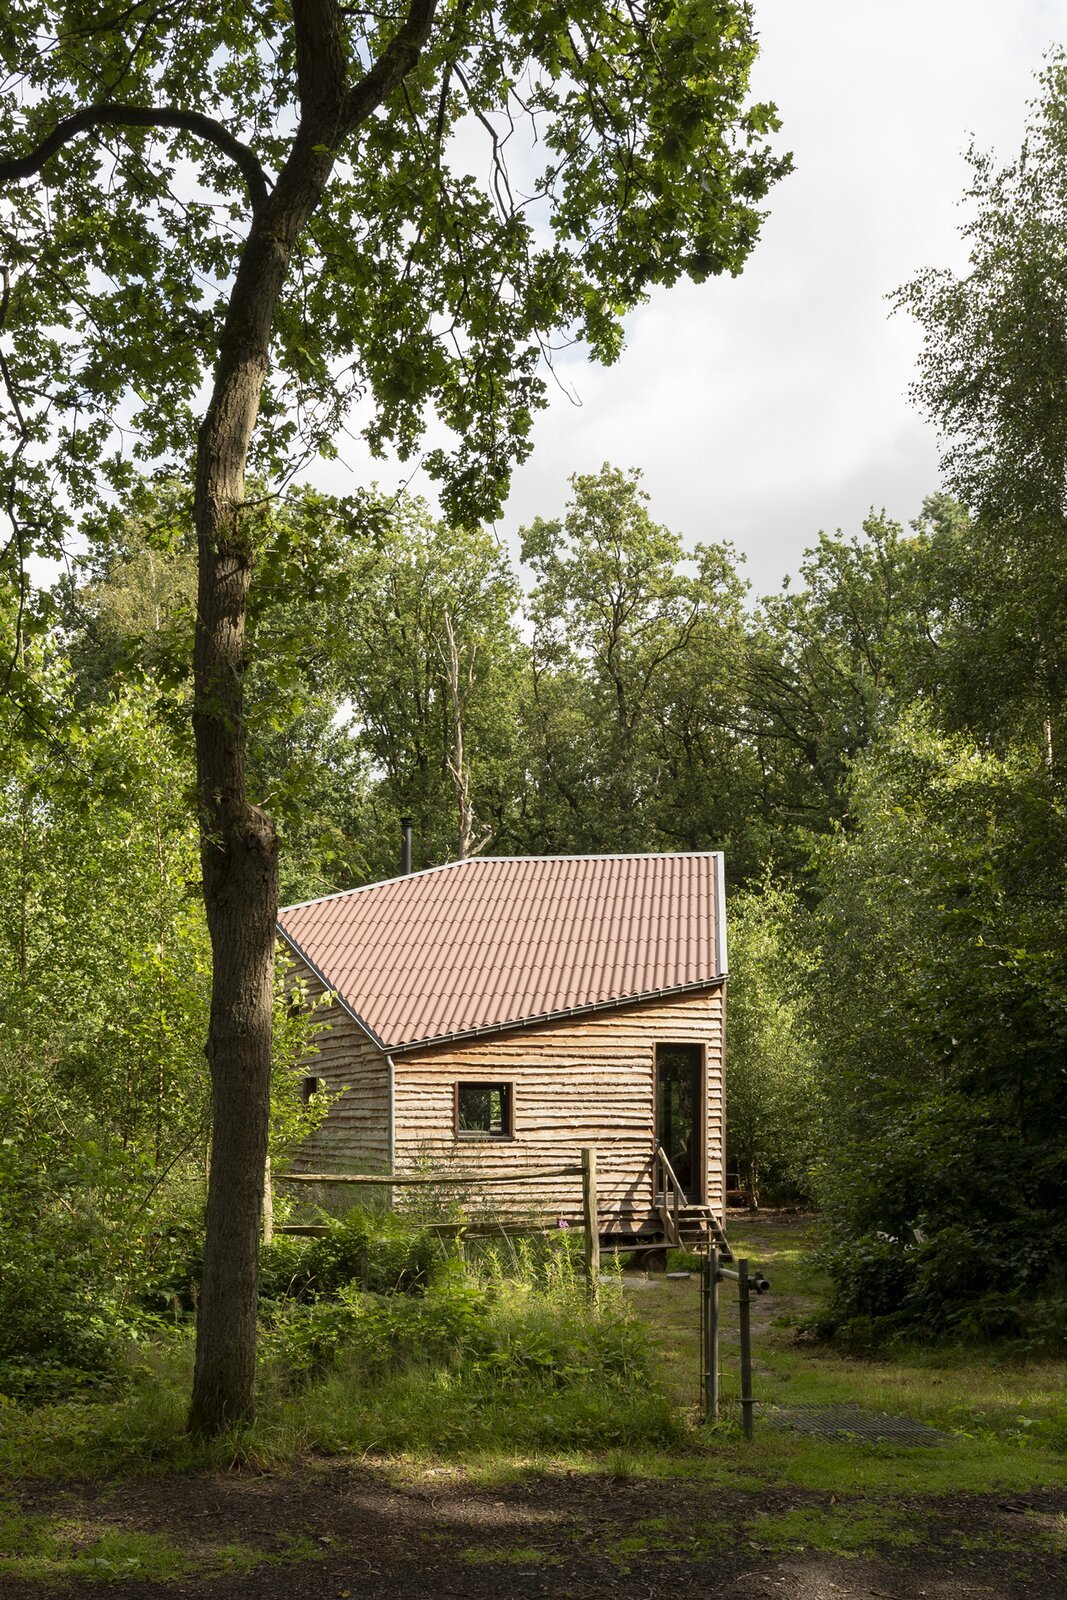 This Tiny Cabin Is Biodegradable, Recyclable, and Relocatable